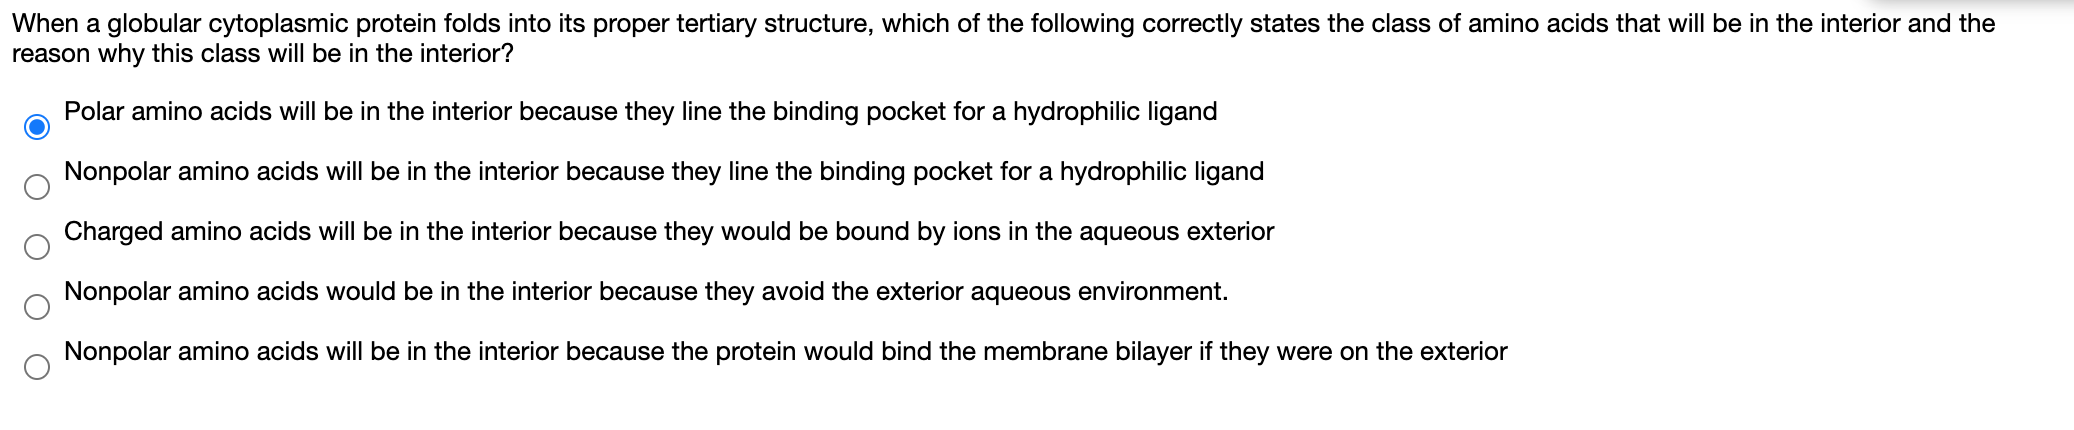 When a globular cytoplasmic protein folds into its proper tertiary structure, which of the following correctly states the class of amino acids that will be in the interior and the
reason why this class will be in the interior?
Polar amino acids will be in the interior because they line the binding pocket for a hydrophilic ligand
Nonpolar amino acids will be in the interior because they line the binding pocket for a hydrophilic ligand
Charged amino acids will be in the interior because they would be bound by ions in the aqueous exterior
Nonpolar amino acids would be in the interior because they avoid the exterior aqueous environment.
Nonpolar amino acids will be in the interior because the protein would bind the membrane bilayer if they were on the exterior
